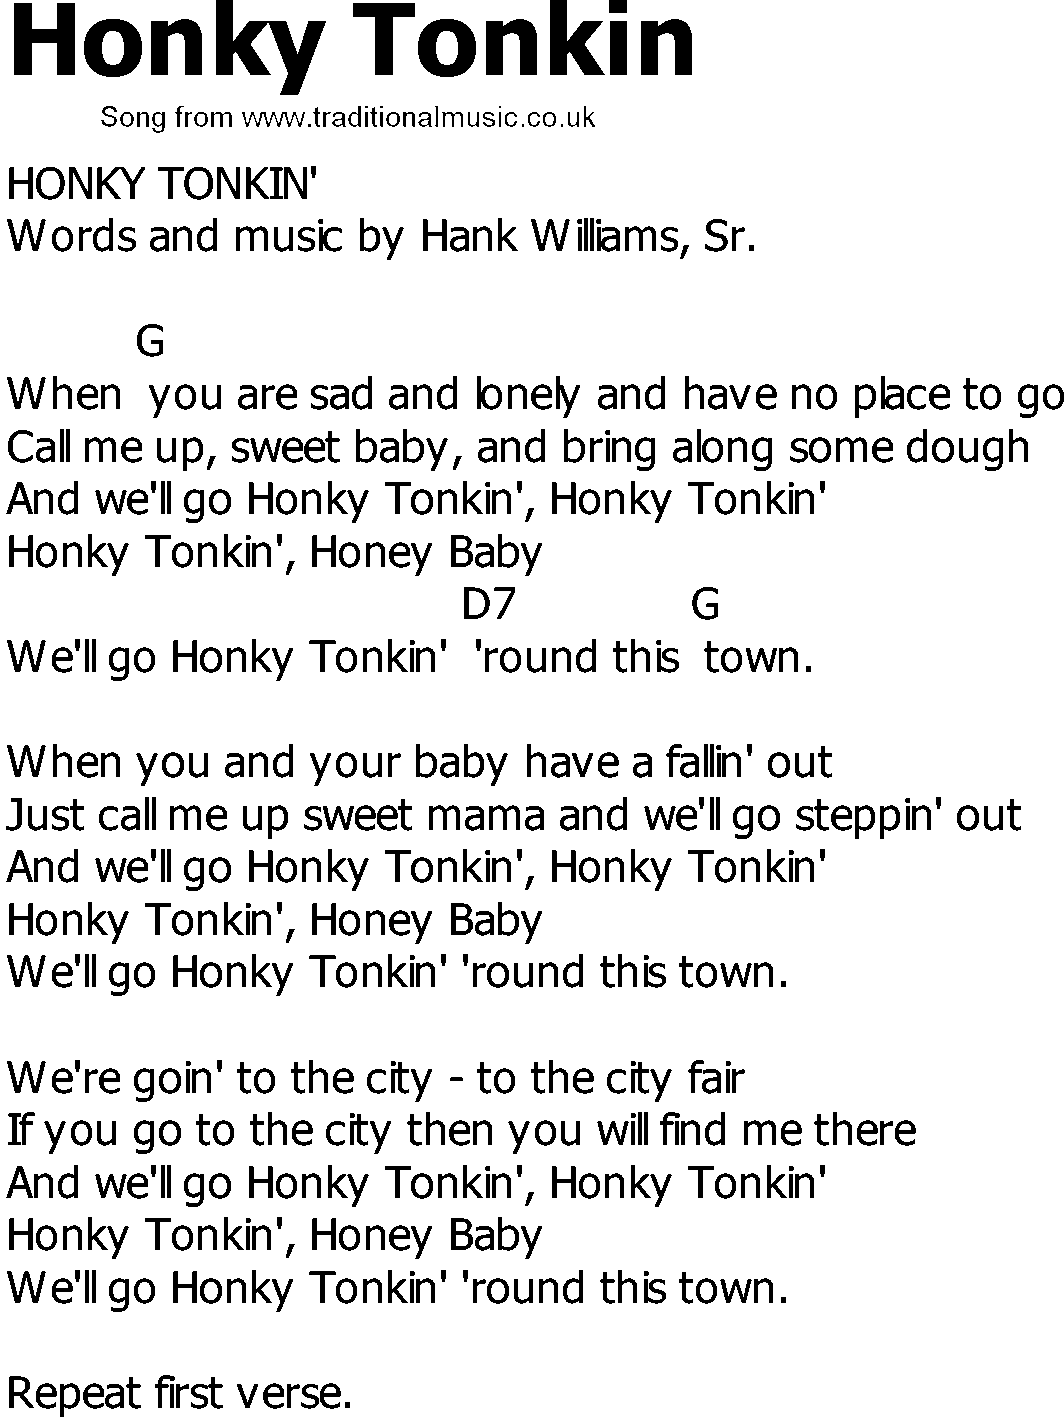 Old Country song lyrics with chords - Honky Tonkin